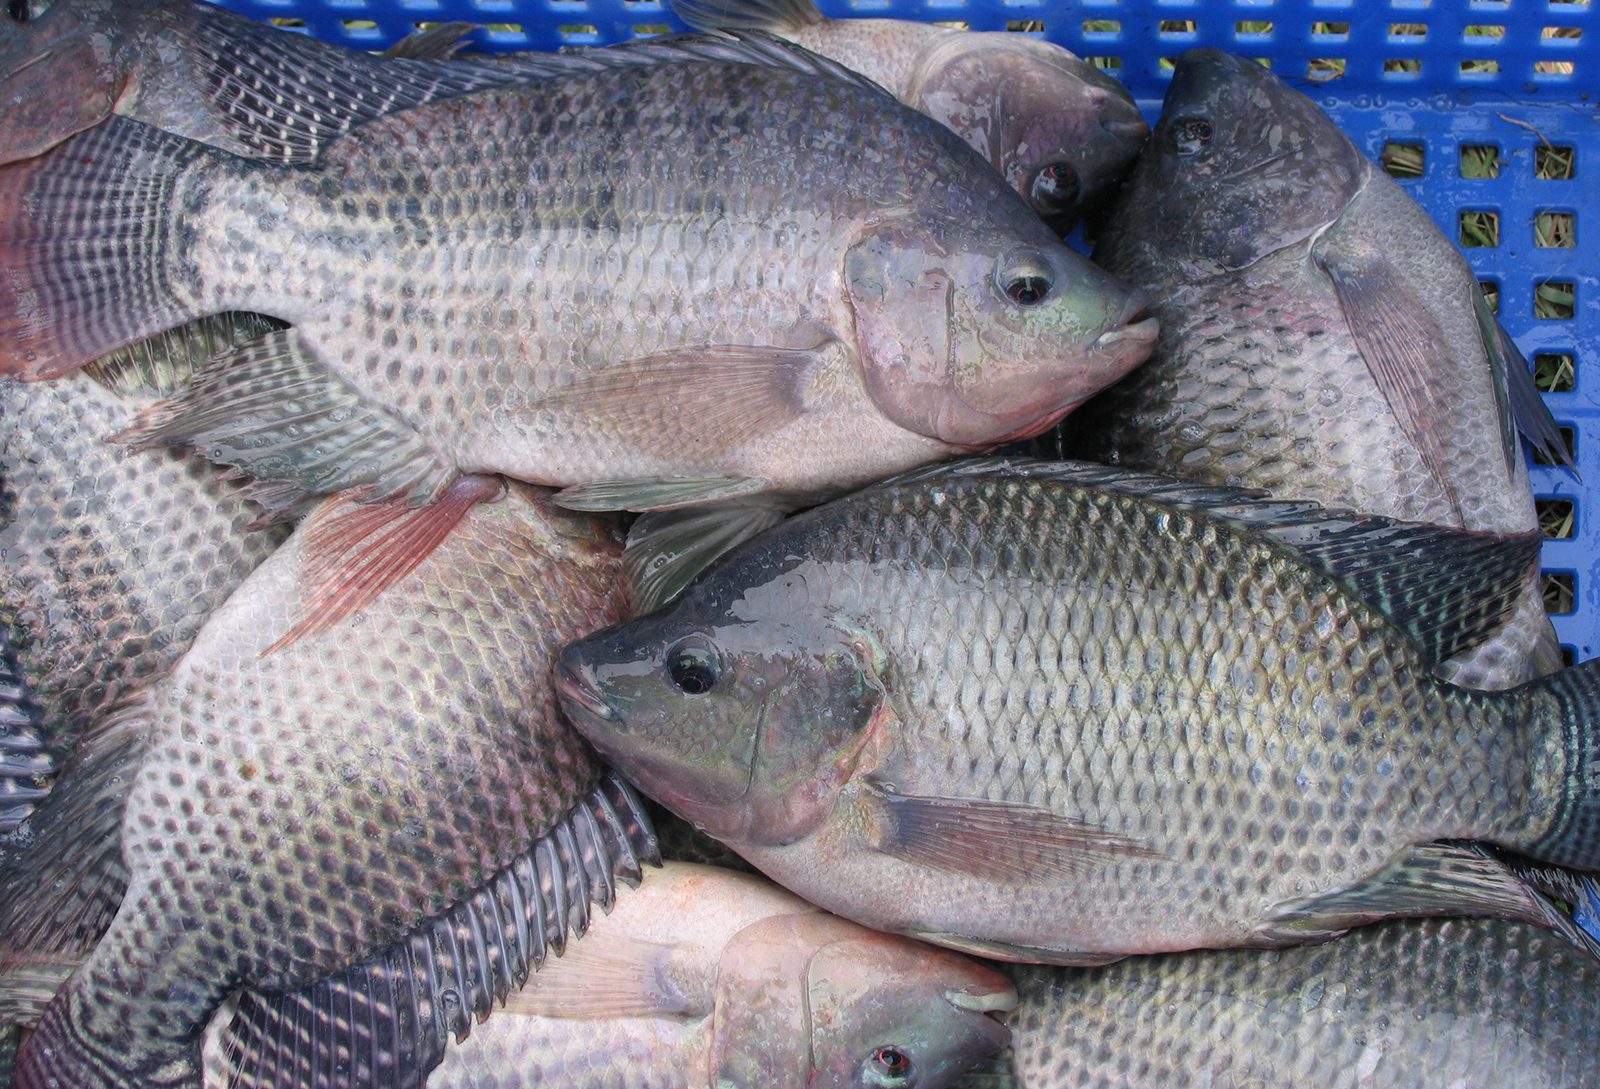 Mass fish farming project to produce 600 tonnes of tilapia annually